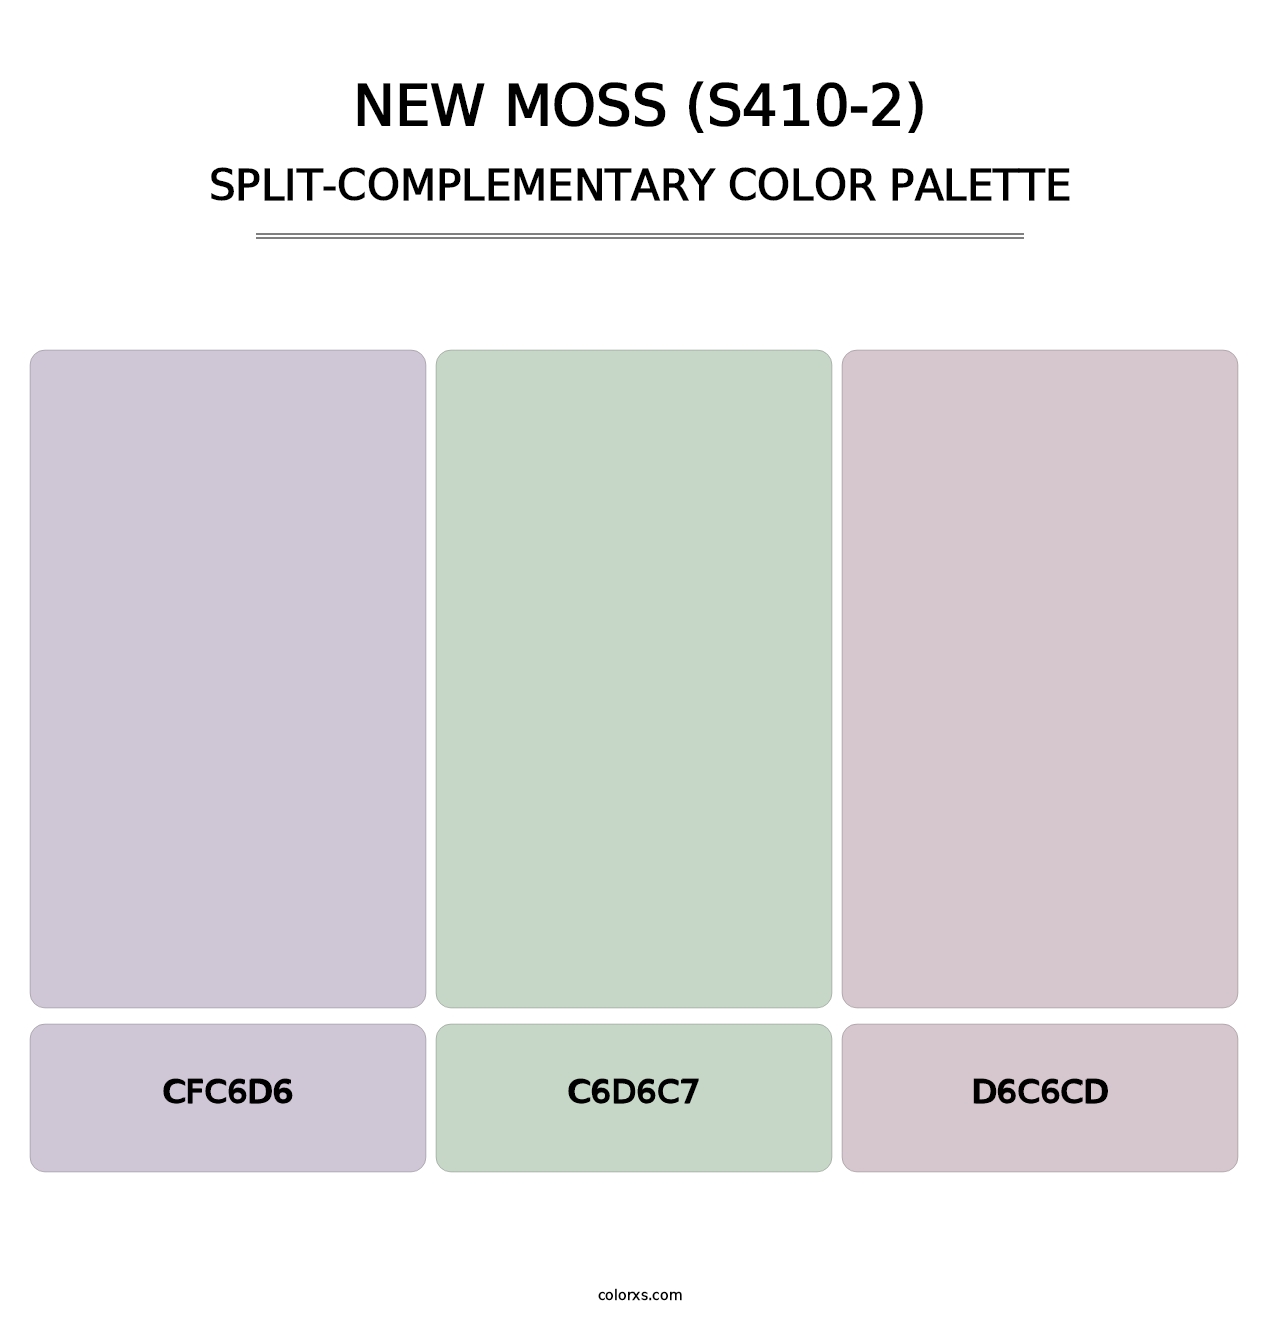 New Moss (S410-2) - Split-Complementary Color Palette